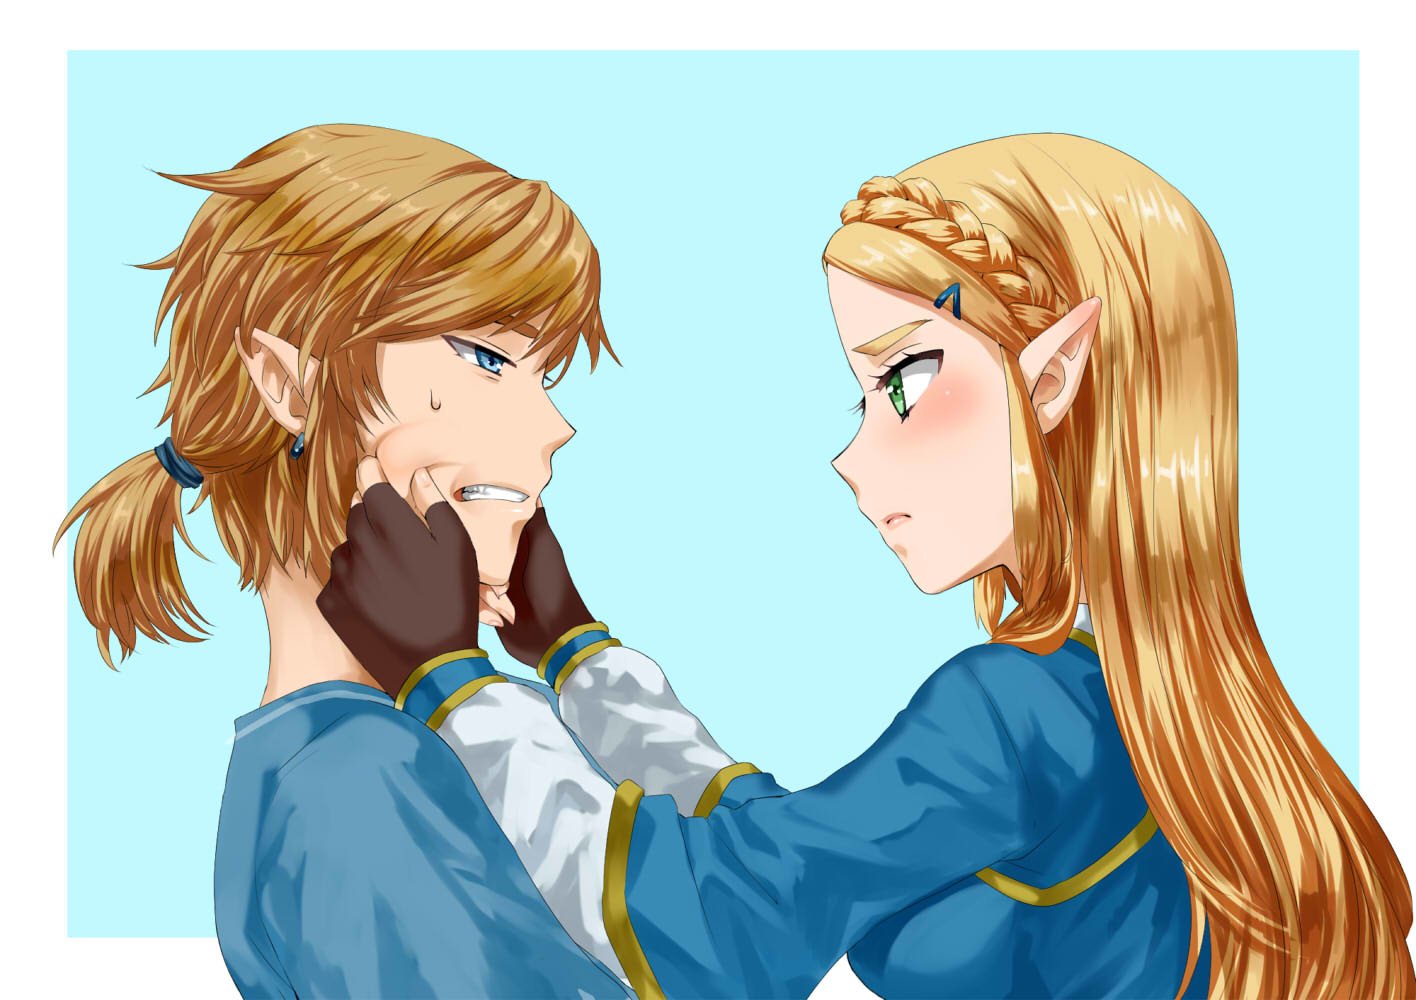 Link and Zelda by a href="https://alphacoders.com/author/view/31889&qu...